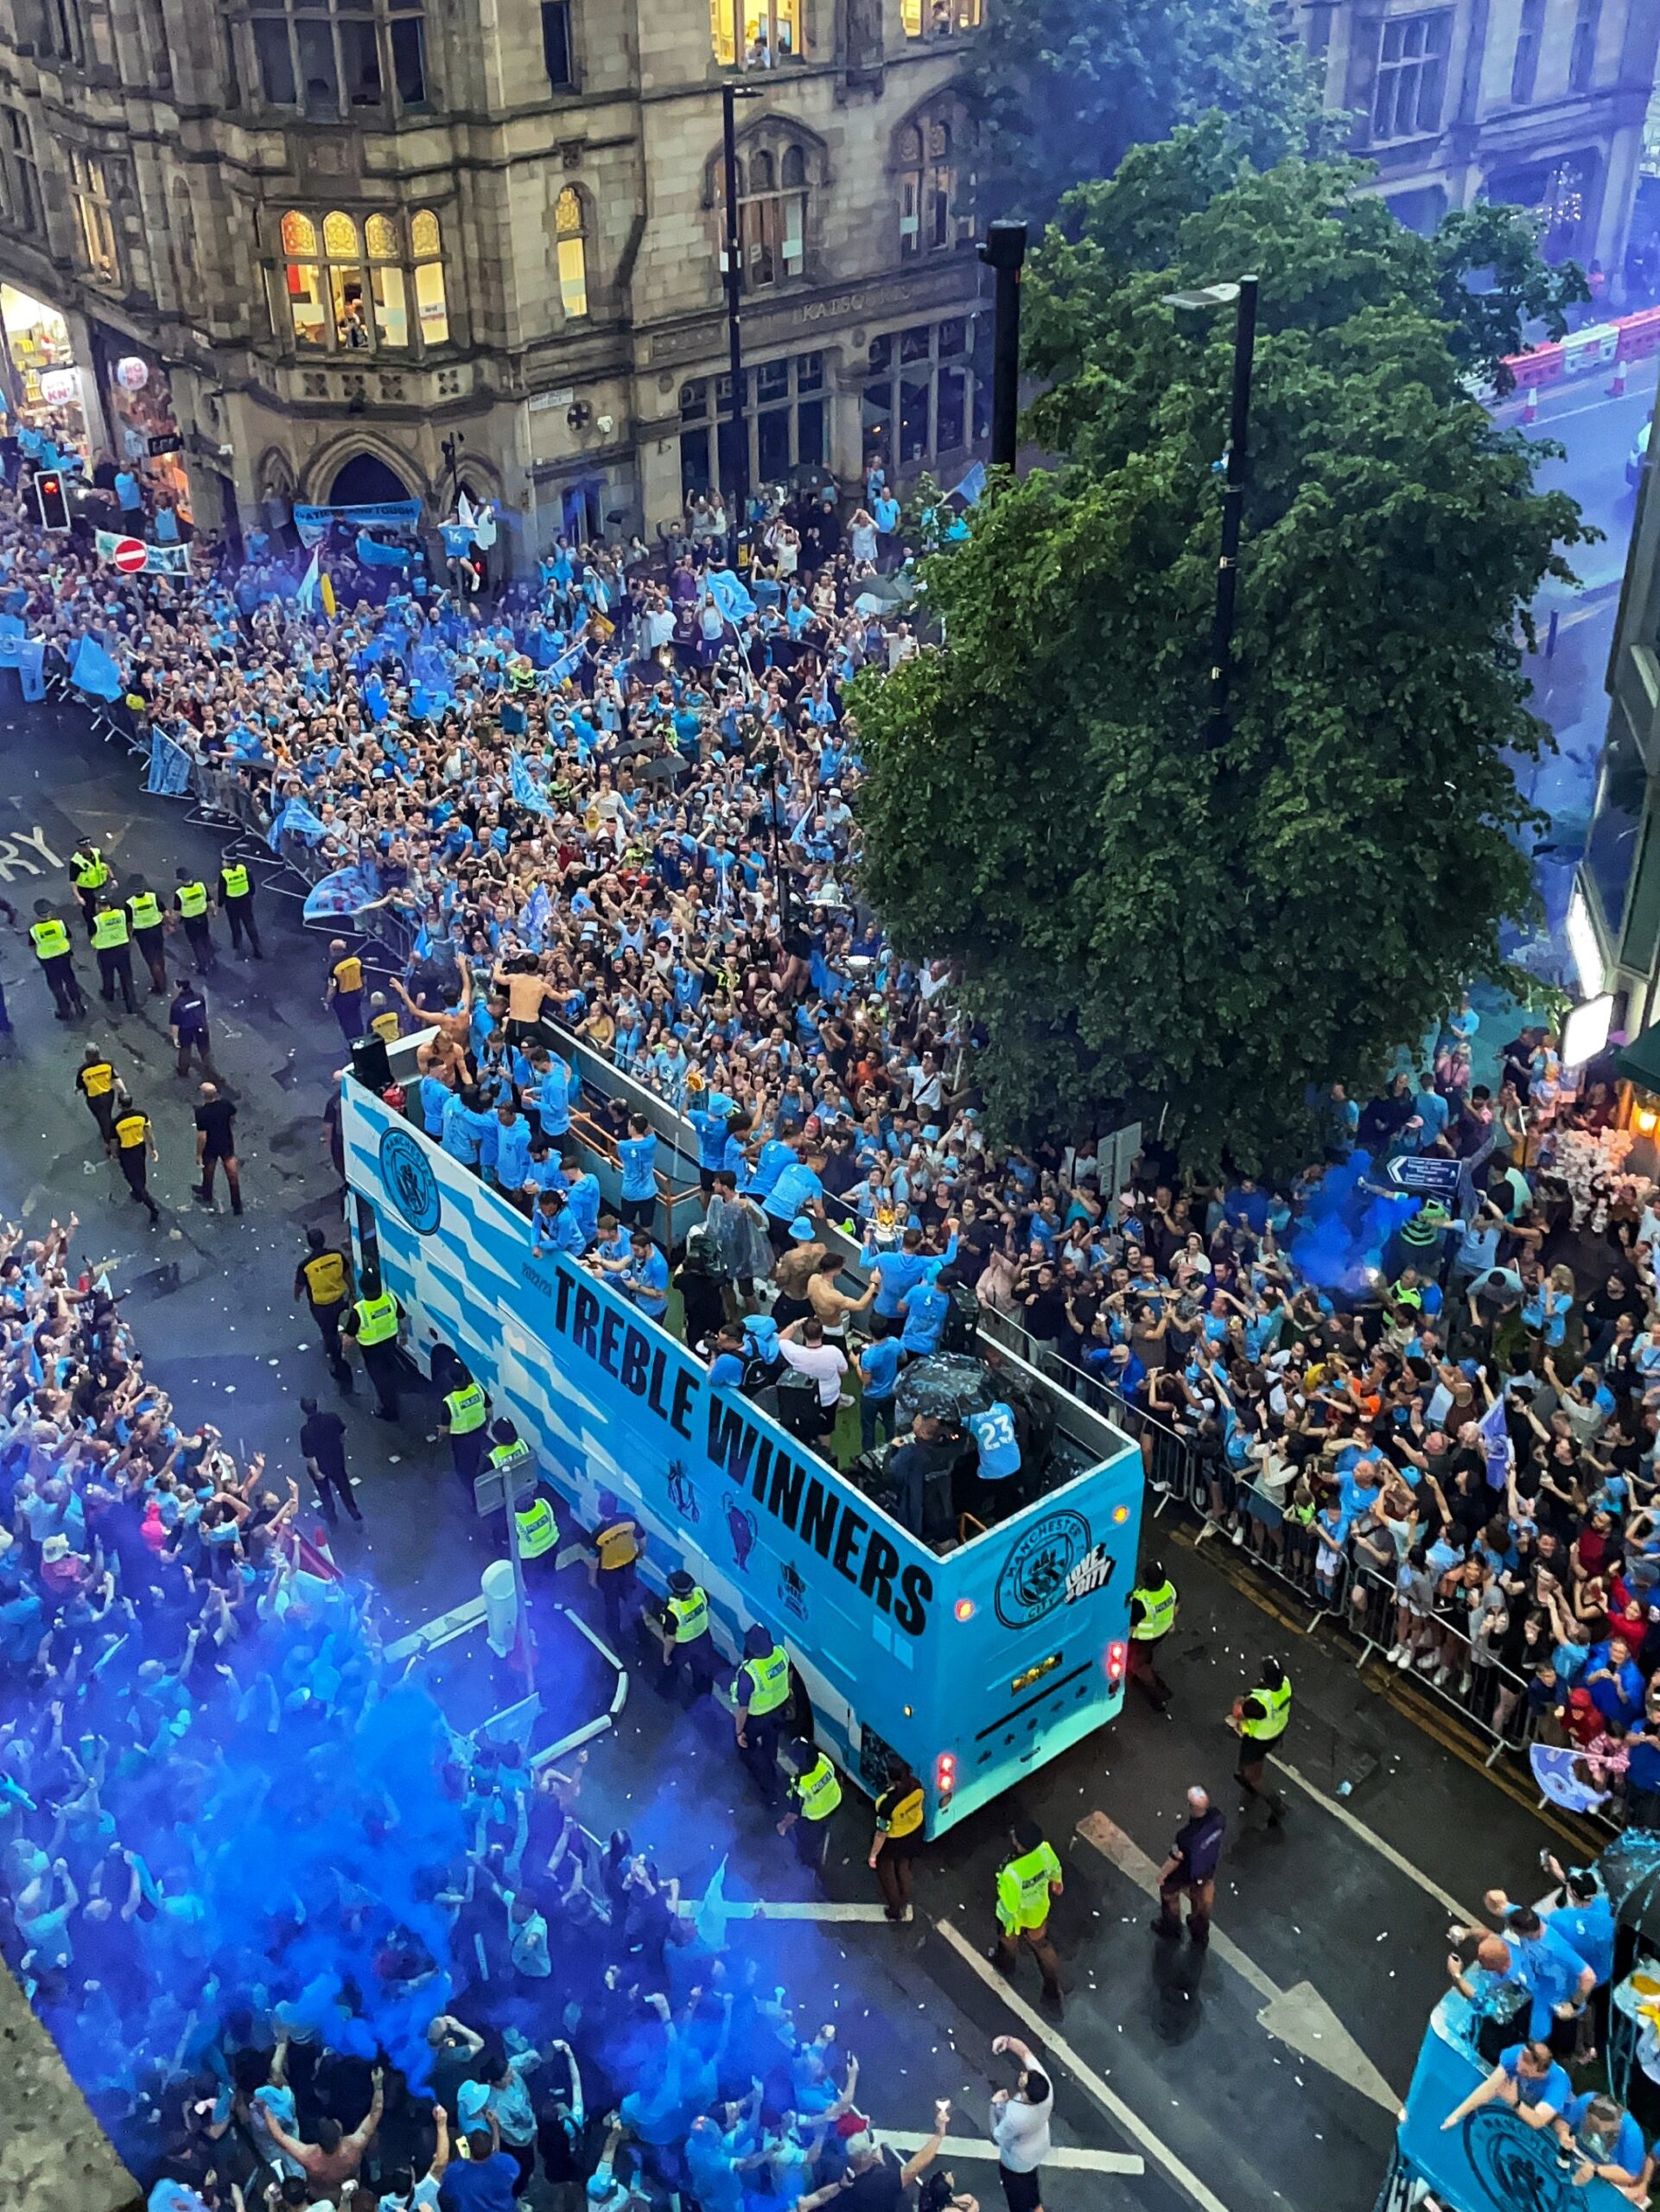 The Manchester City parade will take to the streets on Sunday. Credit: The Manc Group